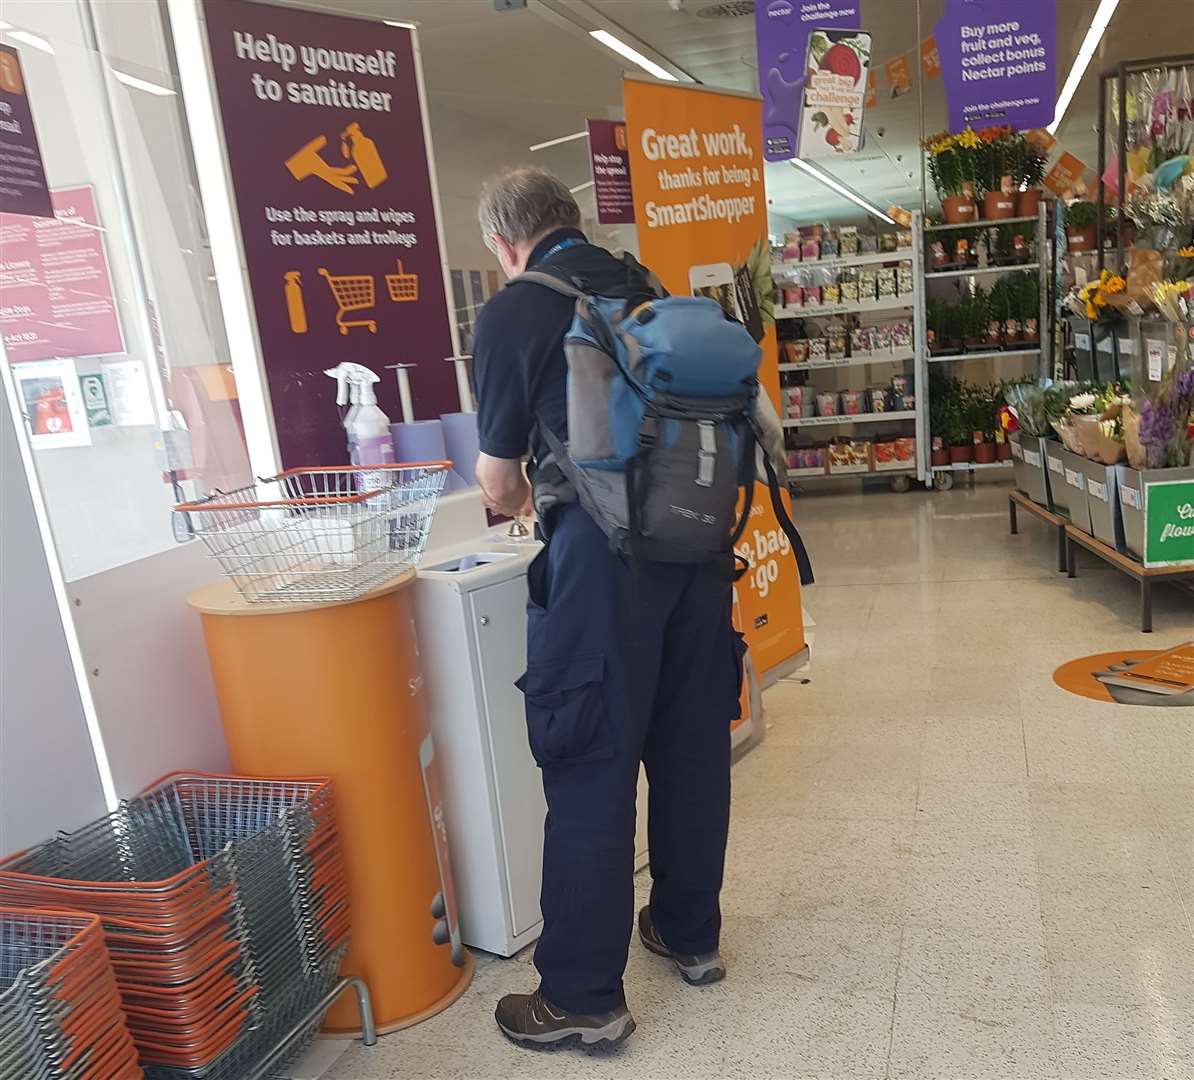 Sanitising stations have been introduced in Sainsbury's